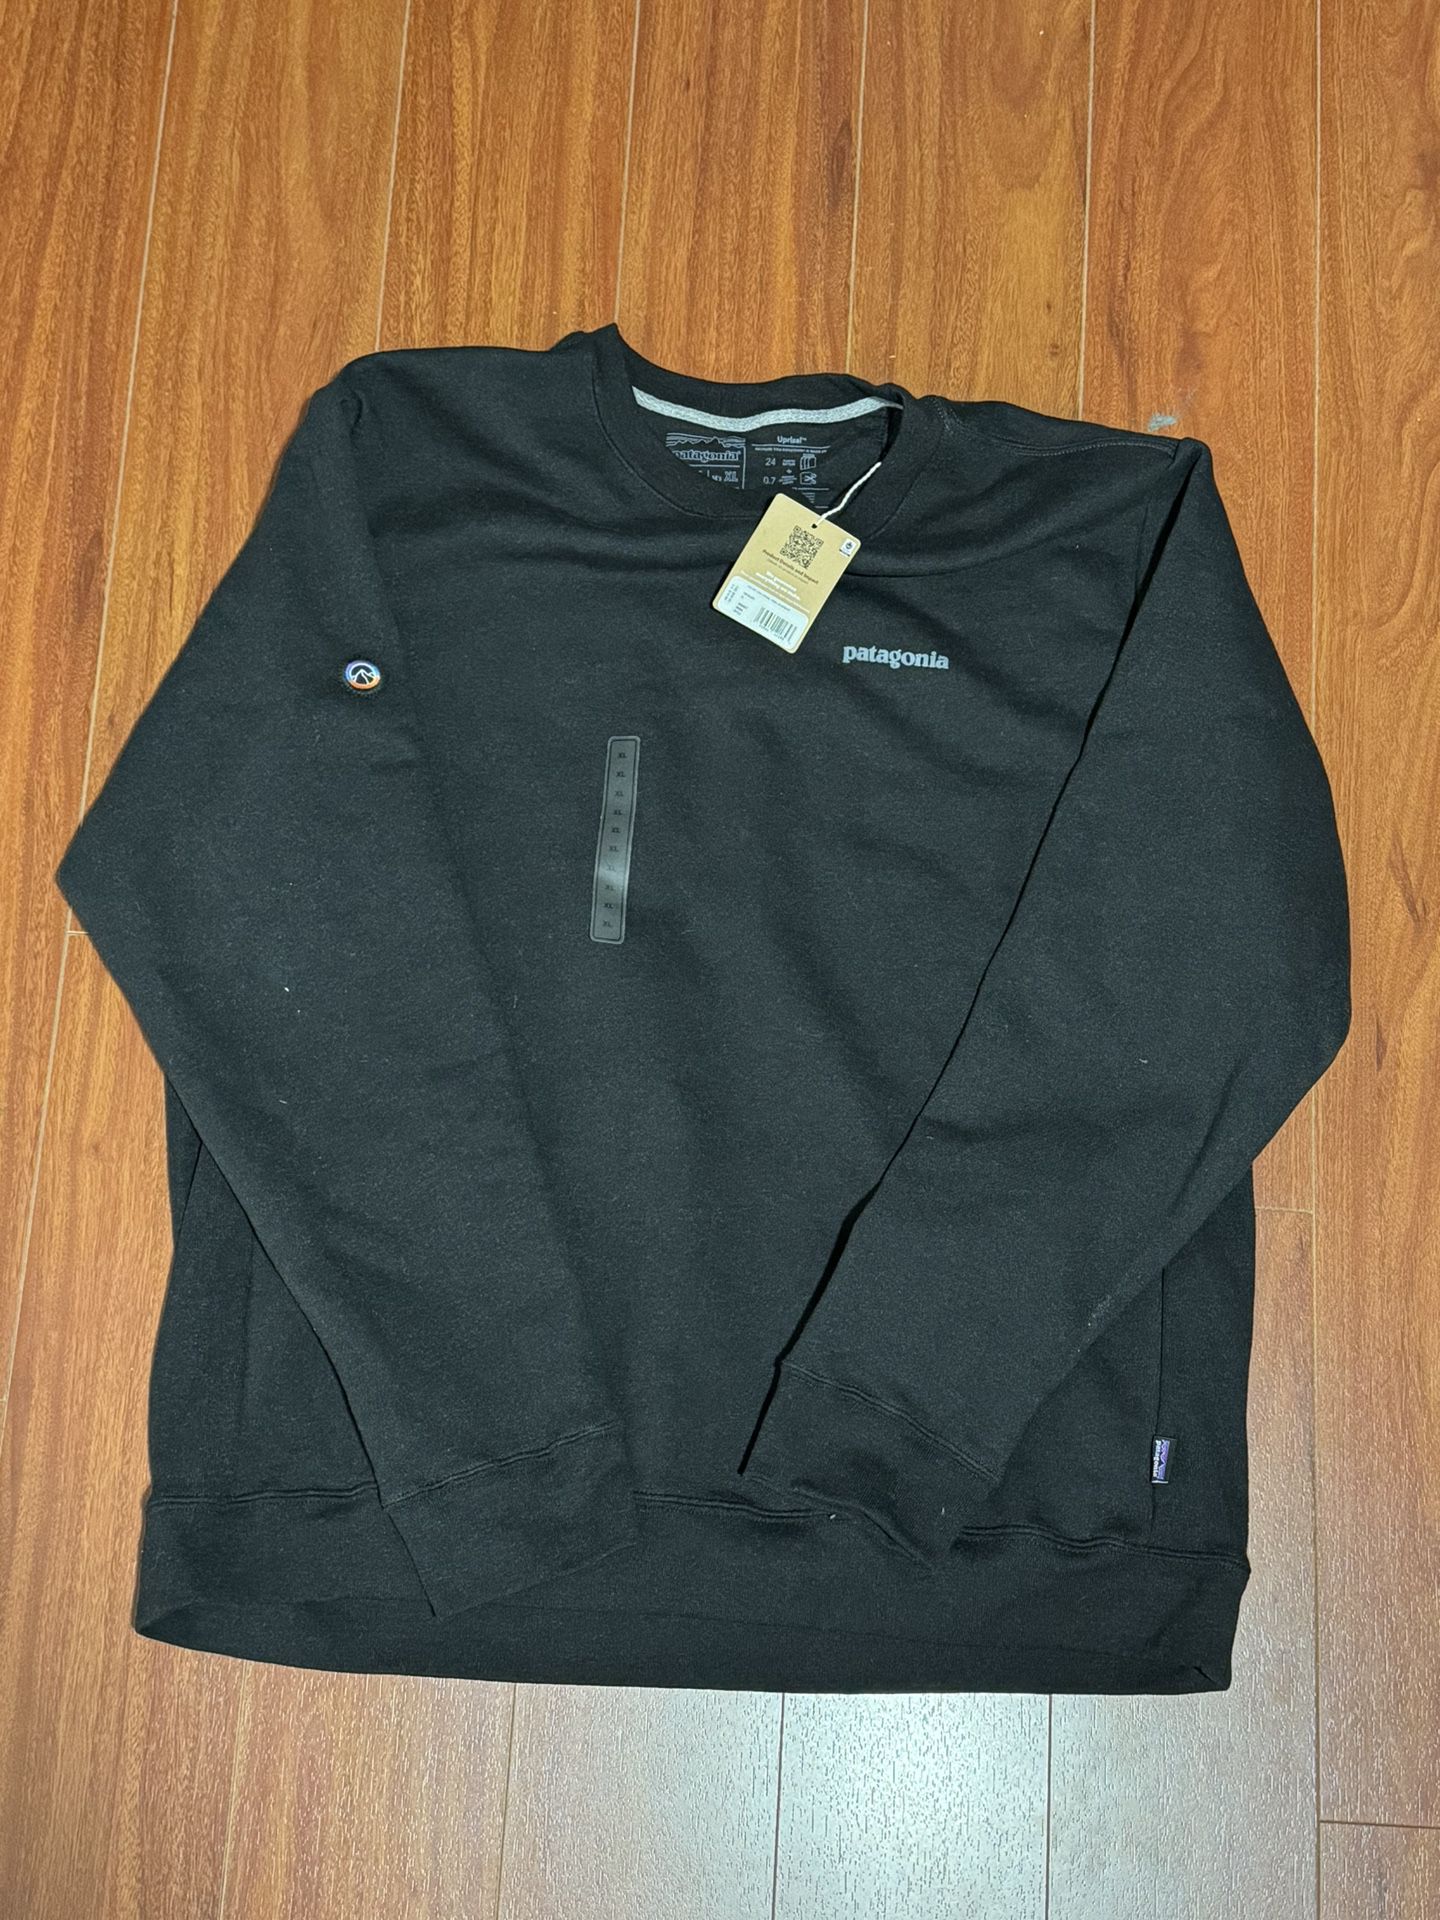 Brand New Men’s Patagonia Sweater Size XL